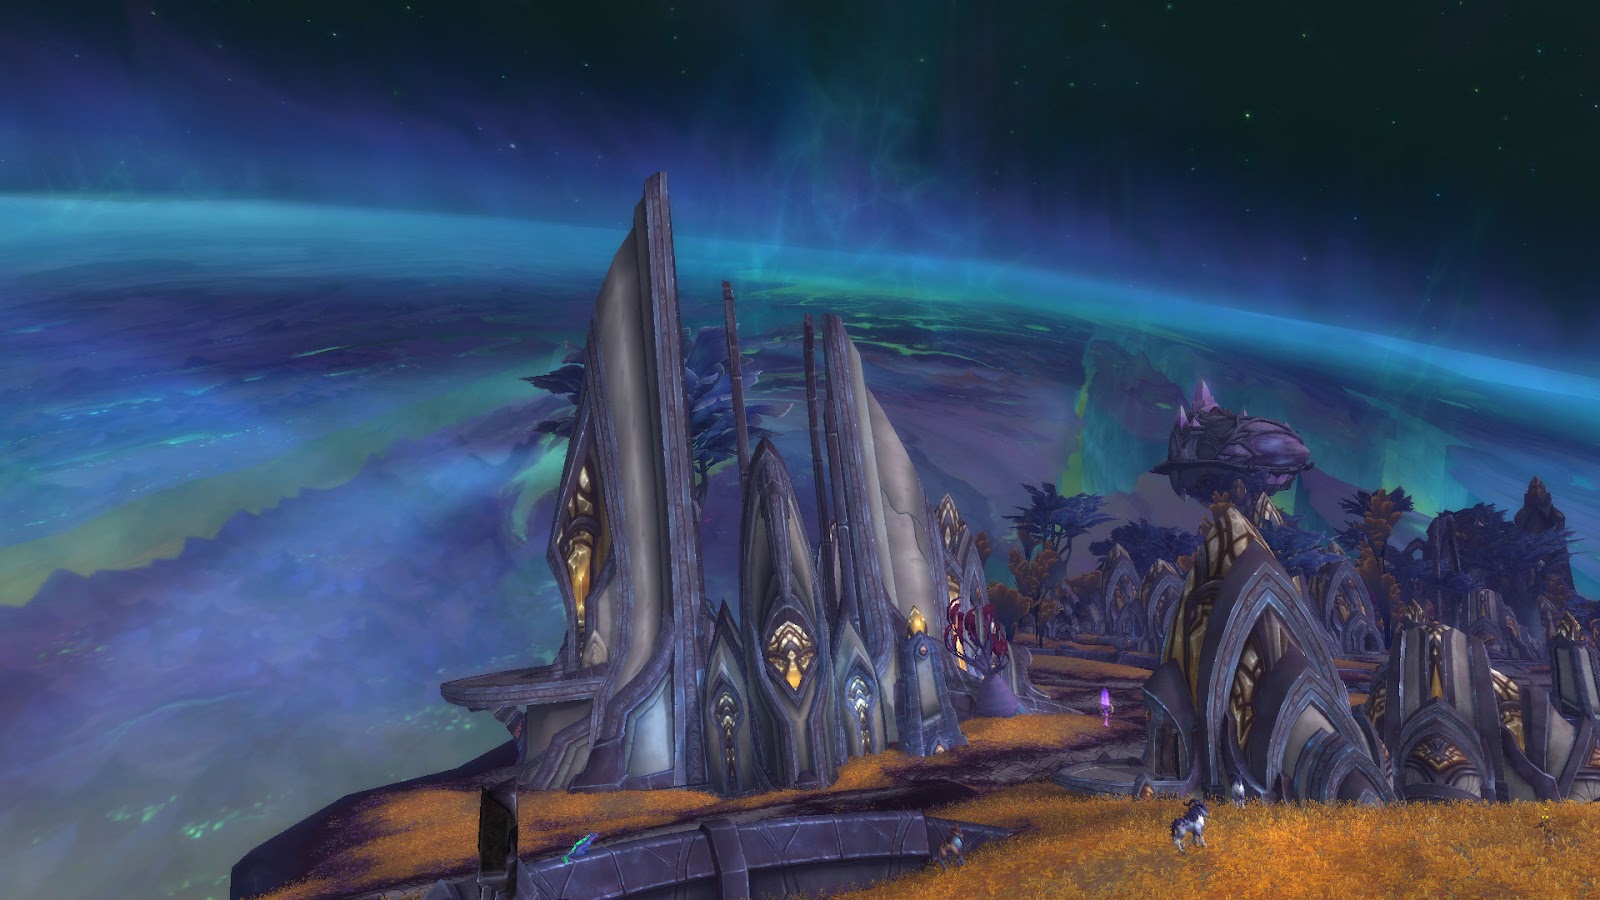 Should we draw inspiration from World of Warcraft to bring peace to the world?